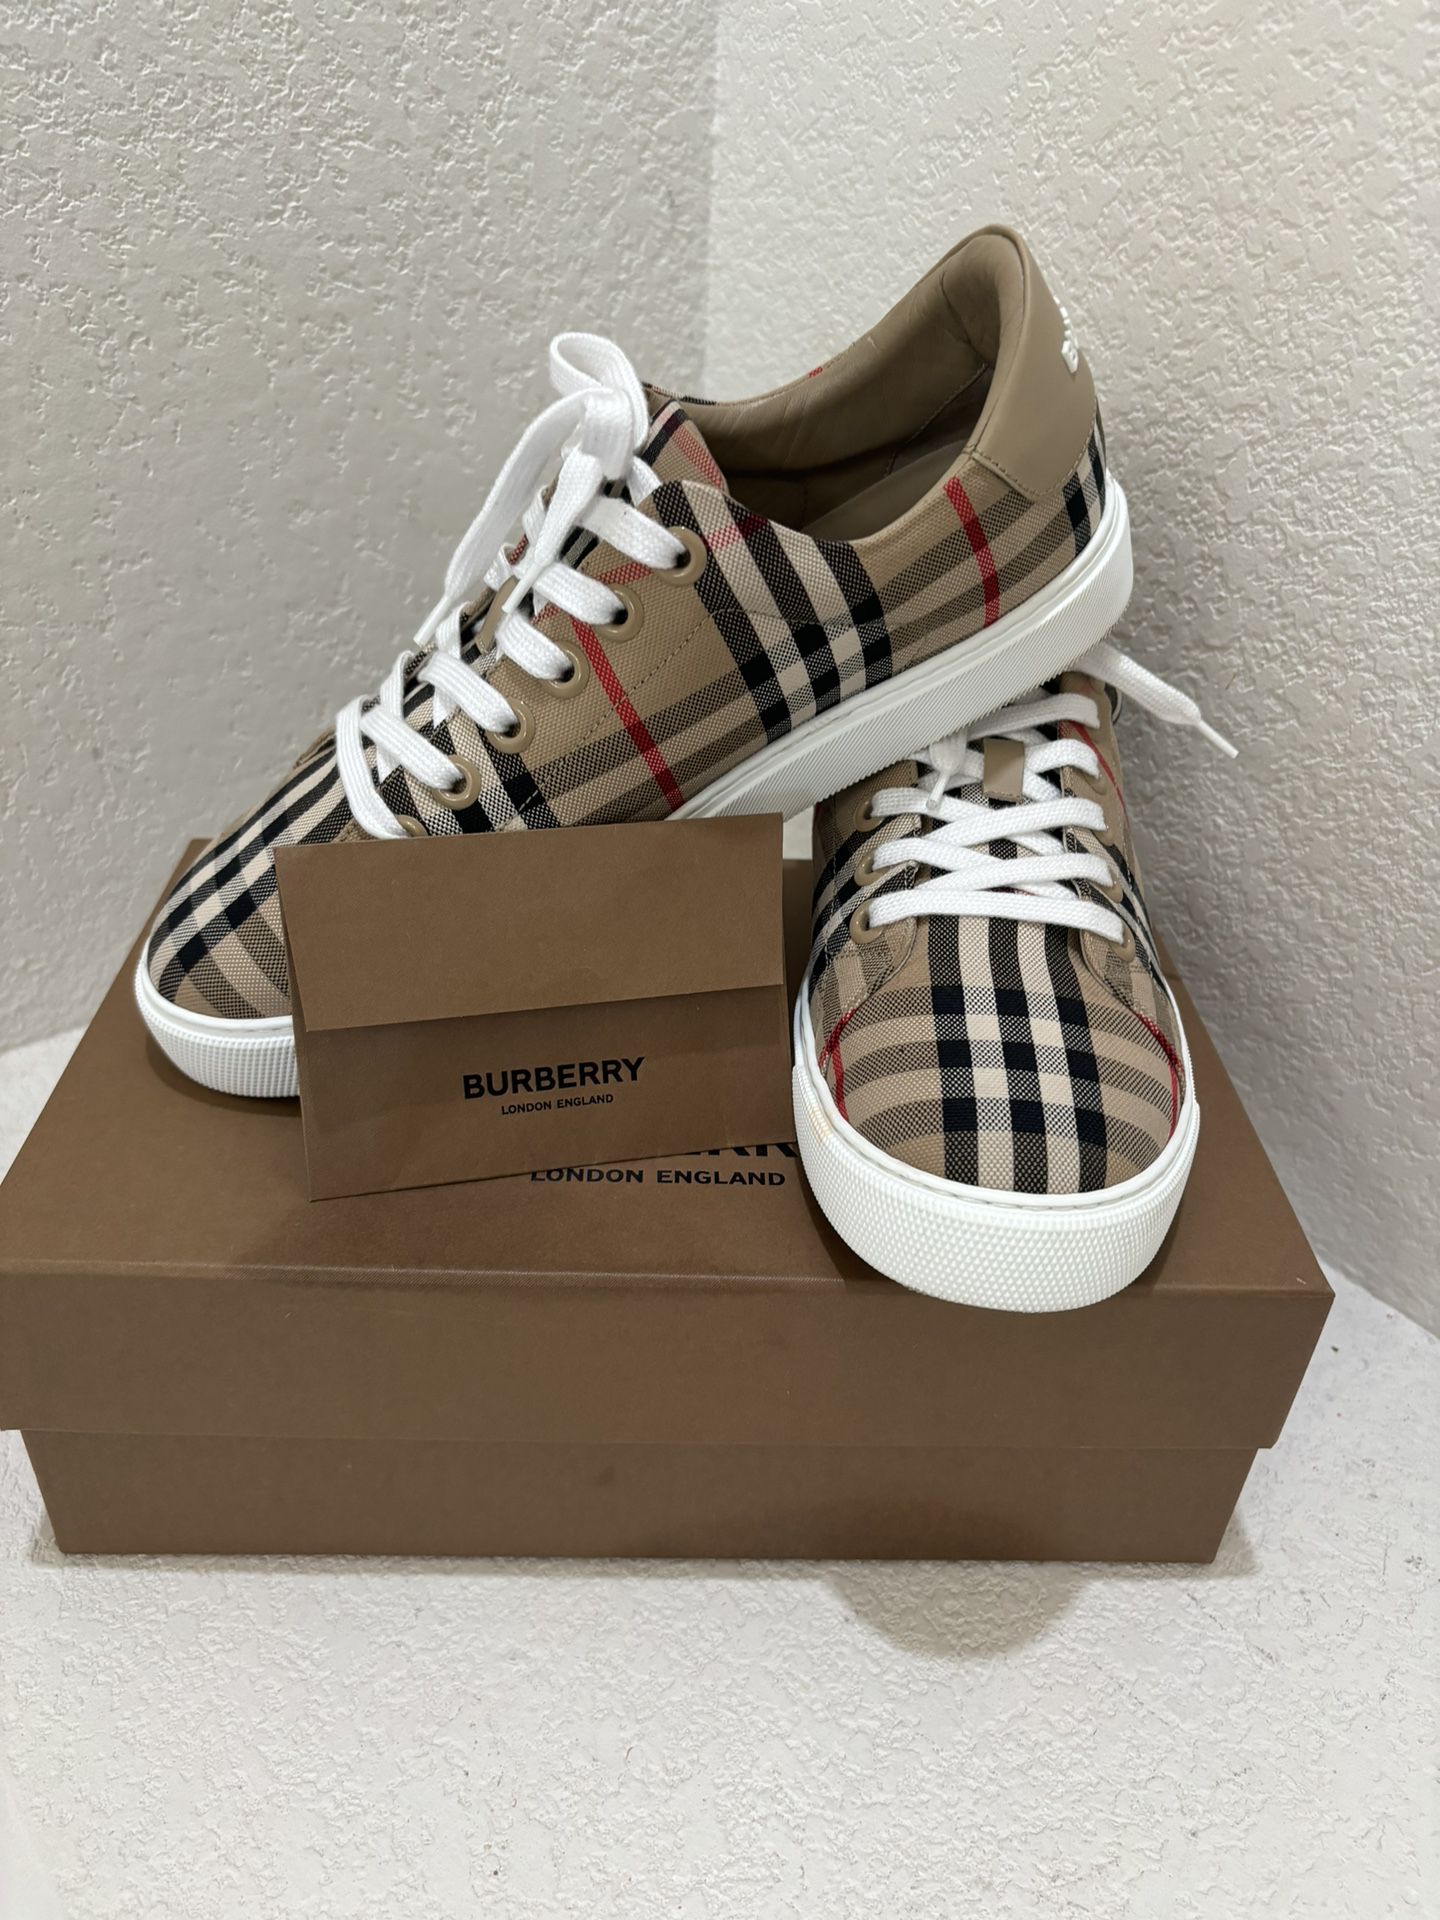 Burberry Shoes Size 39